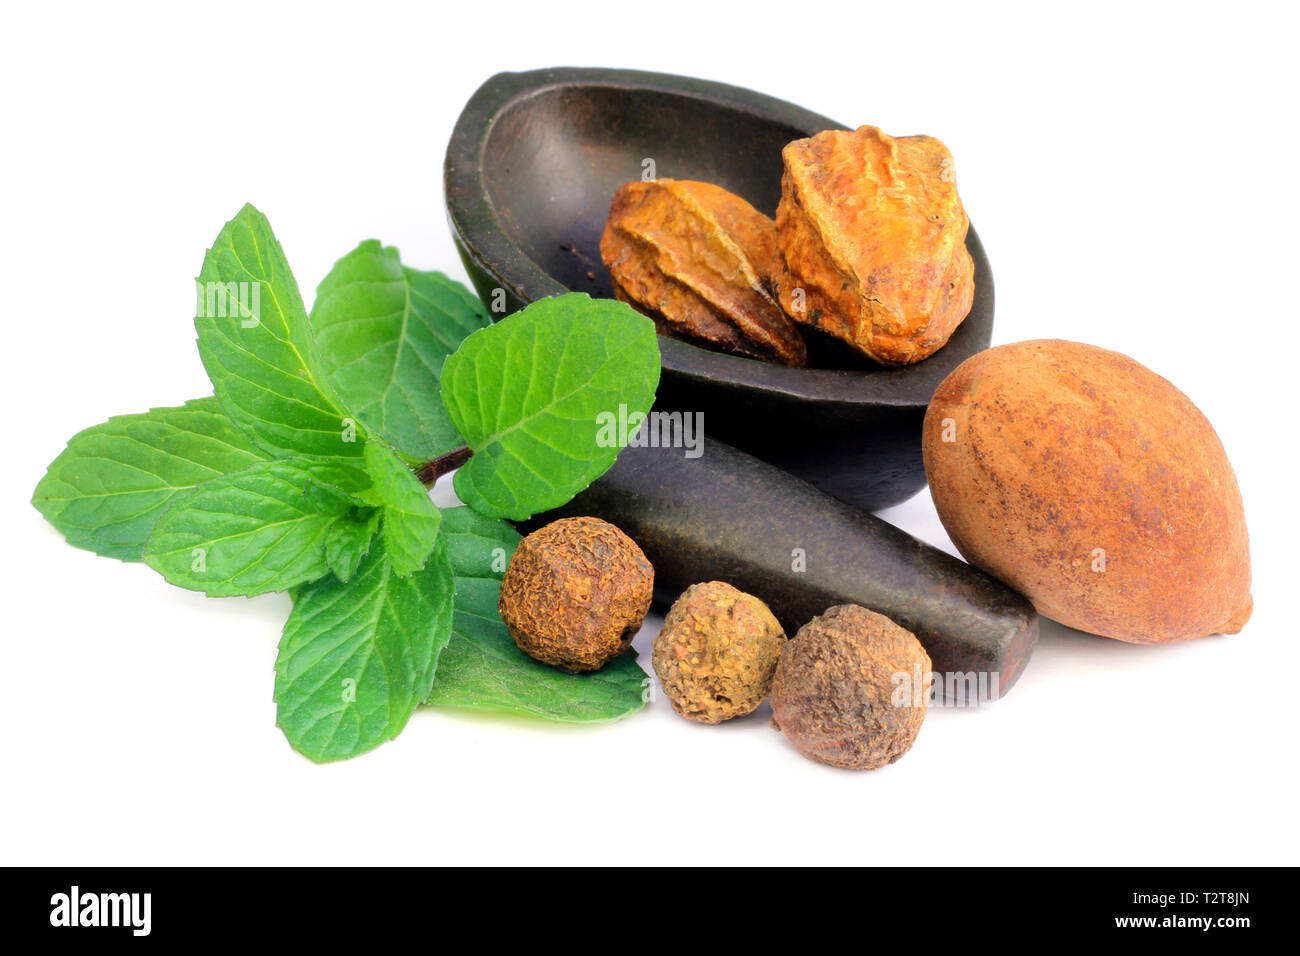 Combinations of herbal medicinal fruits with mint have medicine properties. Stock Photo